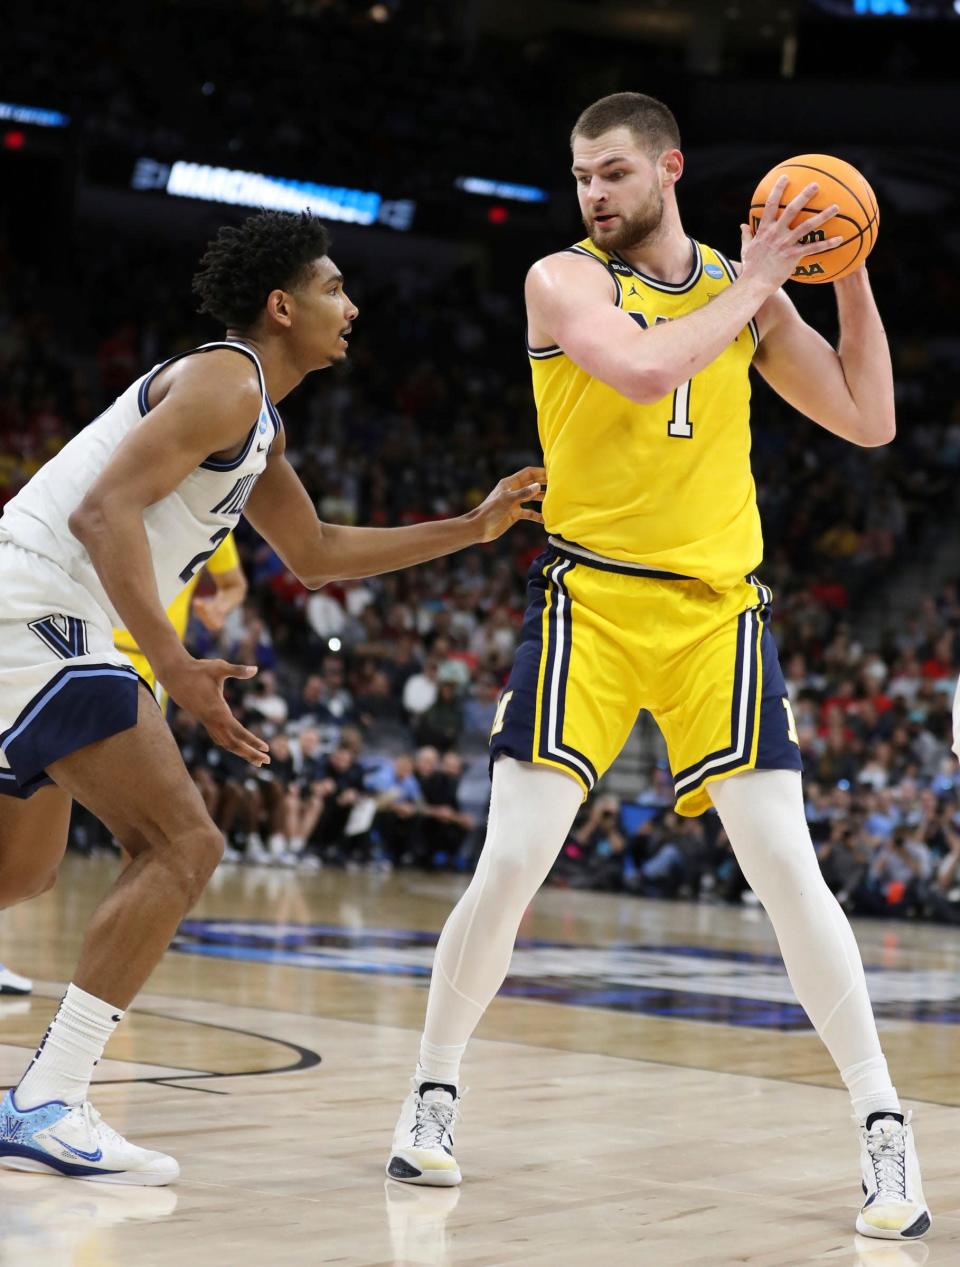 Michigan center Hunter Dickinson is defended by Villanova forward Jermaine Samuels during the second half of U-M's 63-55 loss to Villanova in the Sweet 16 on Thursday, March 24, 2022, at the AT&amp;T Center in San Antonio.